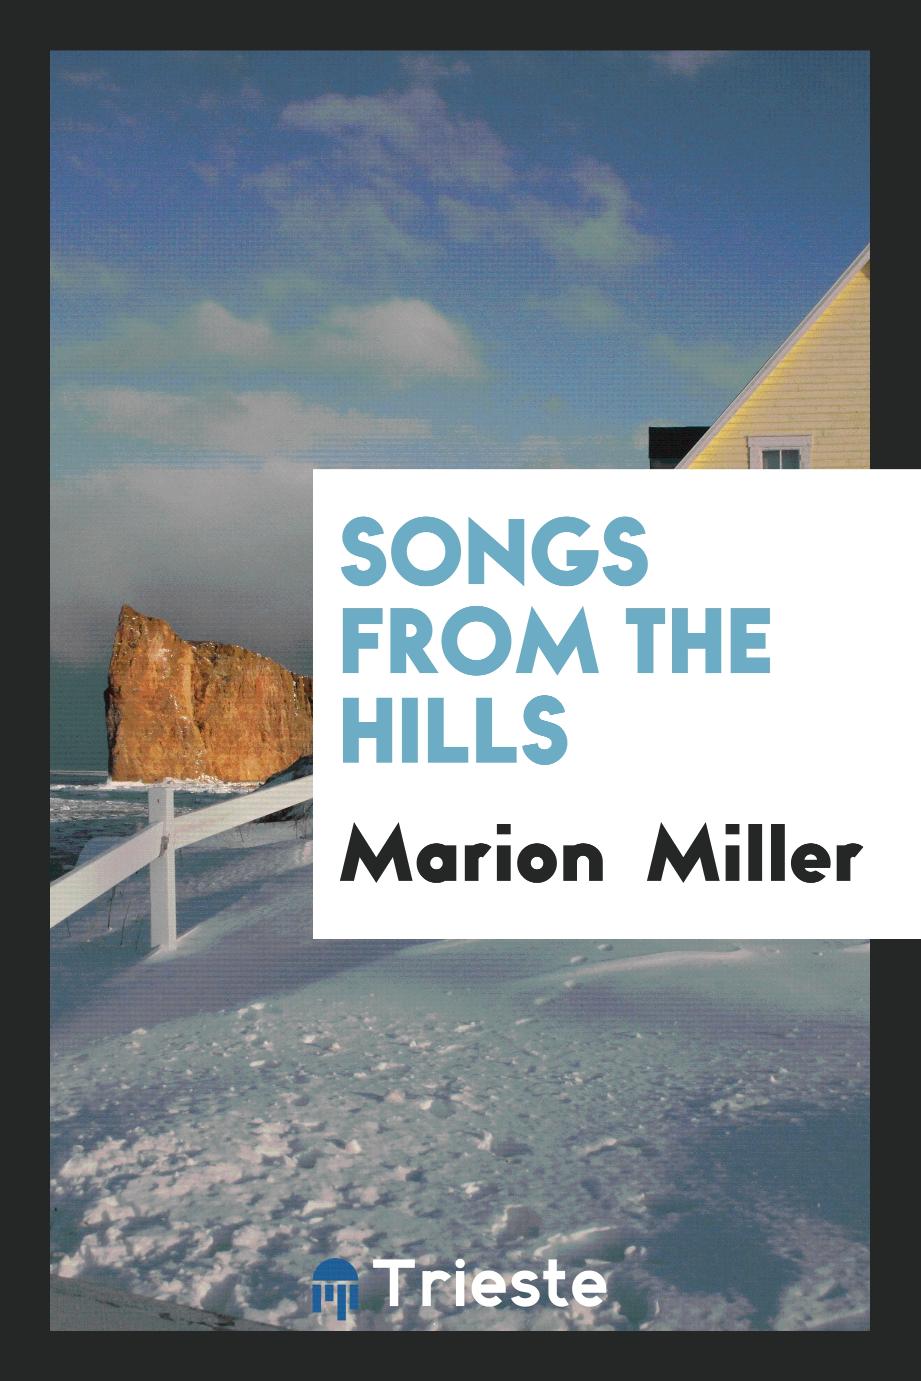 Songs from the hills